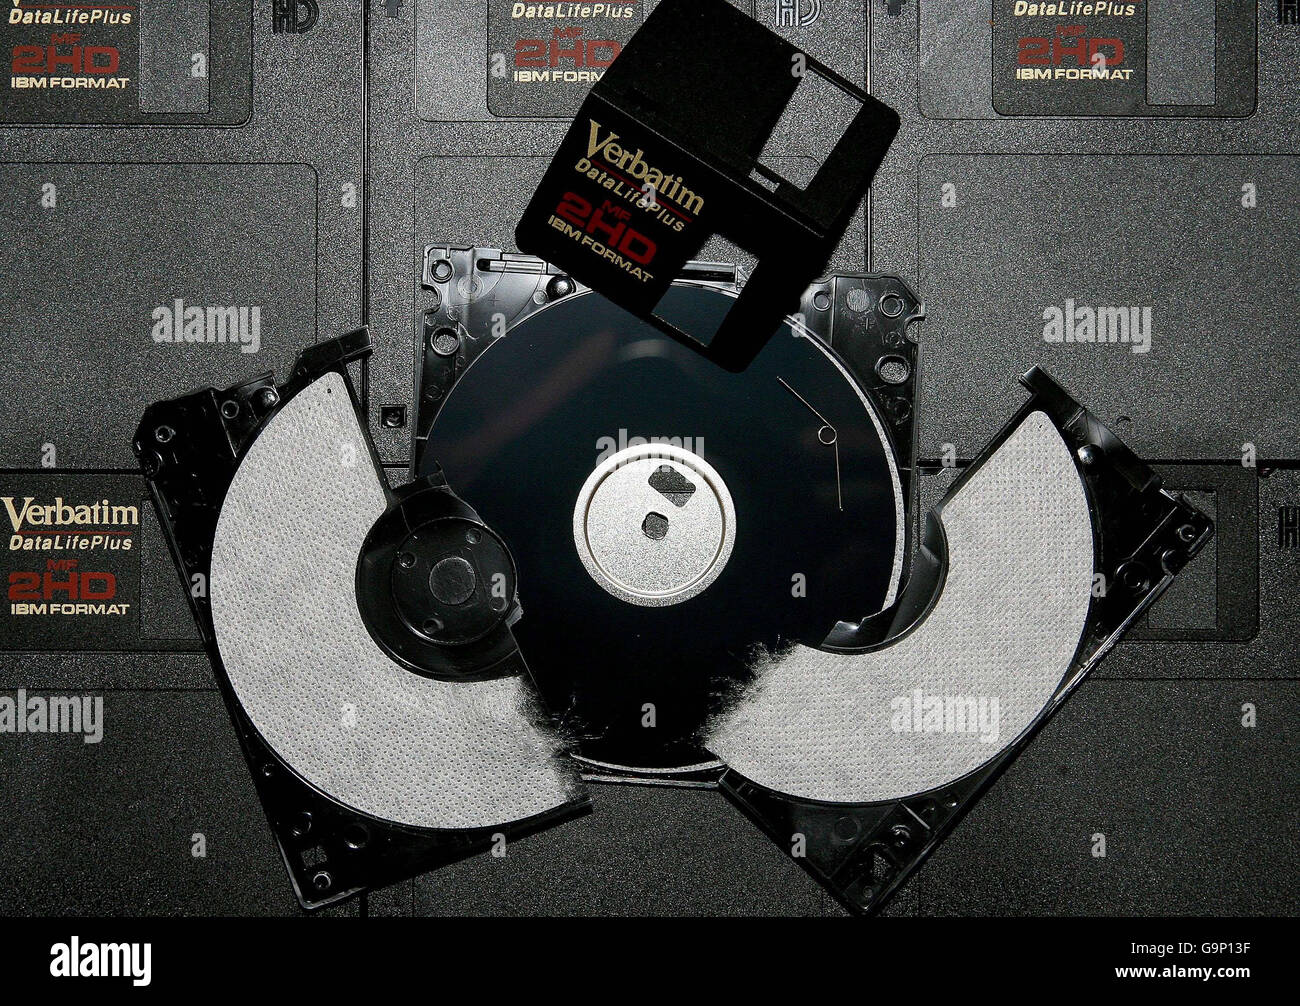 Generic image of floppy discs, which some computer and electrical stores are no longer stocking. Stock Photo